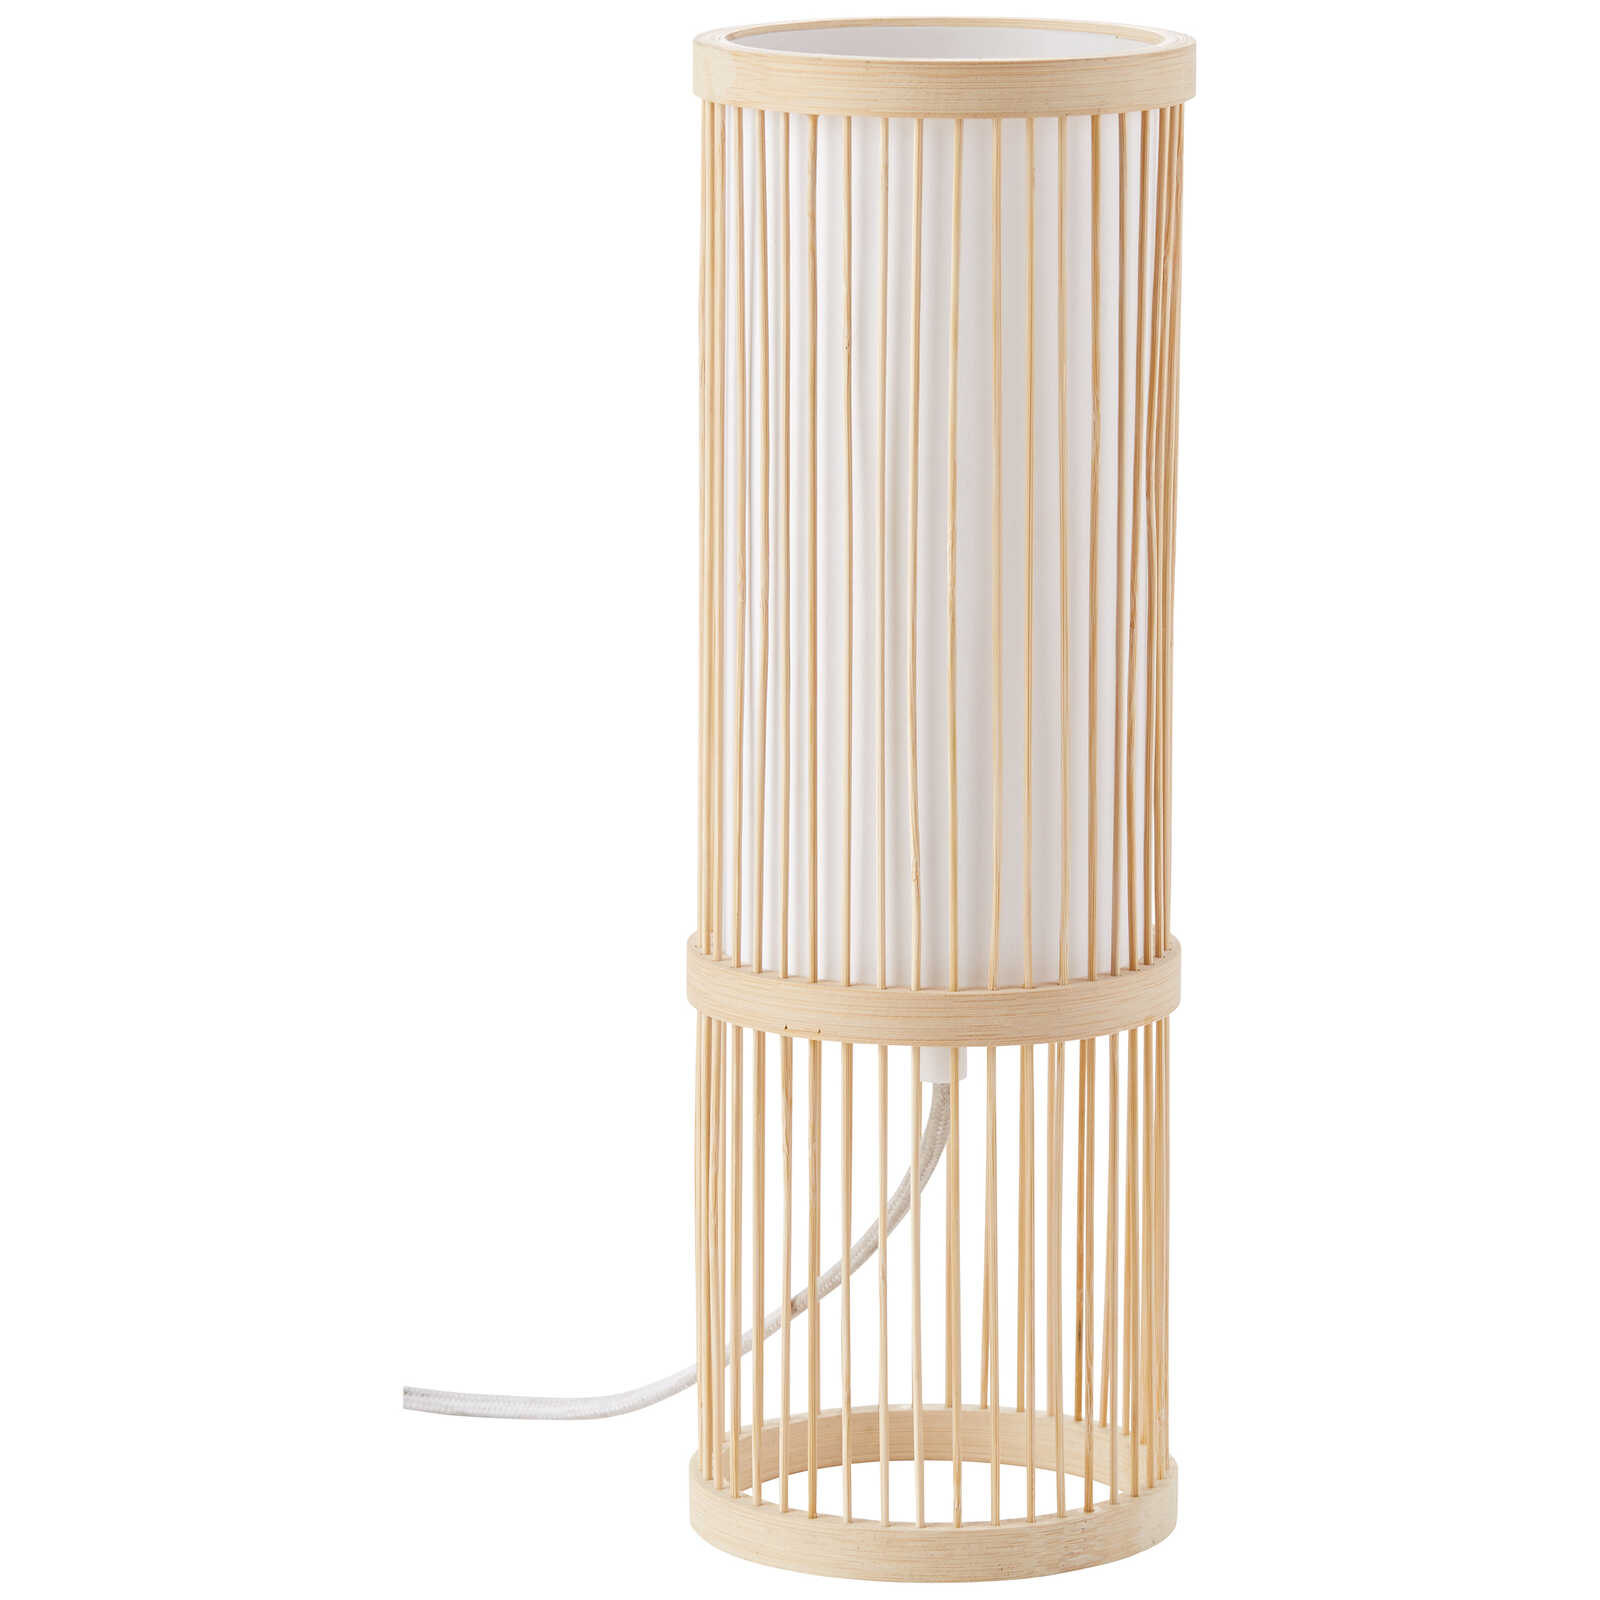             Bamboo table lamp - Luise 2 - Brown
        